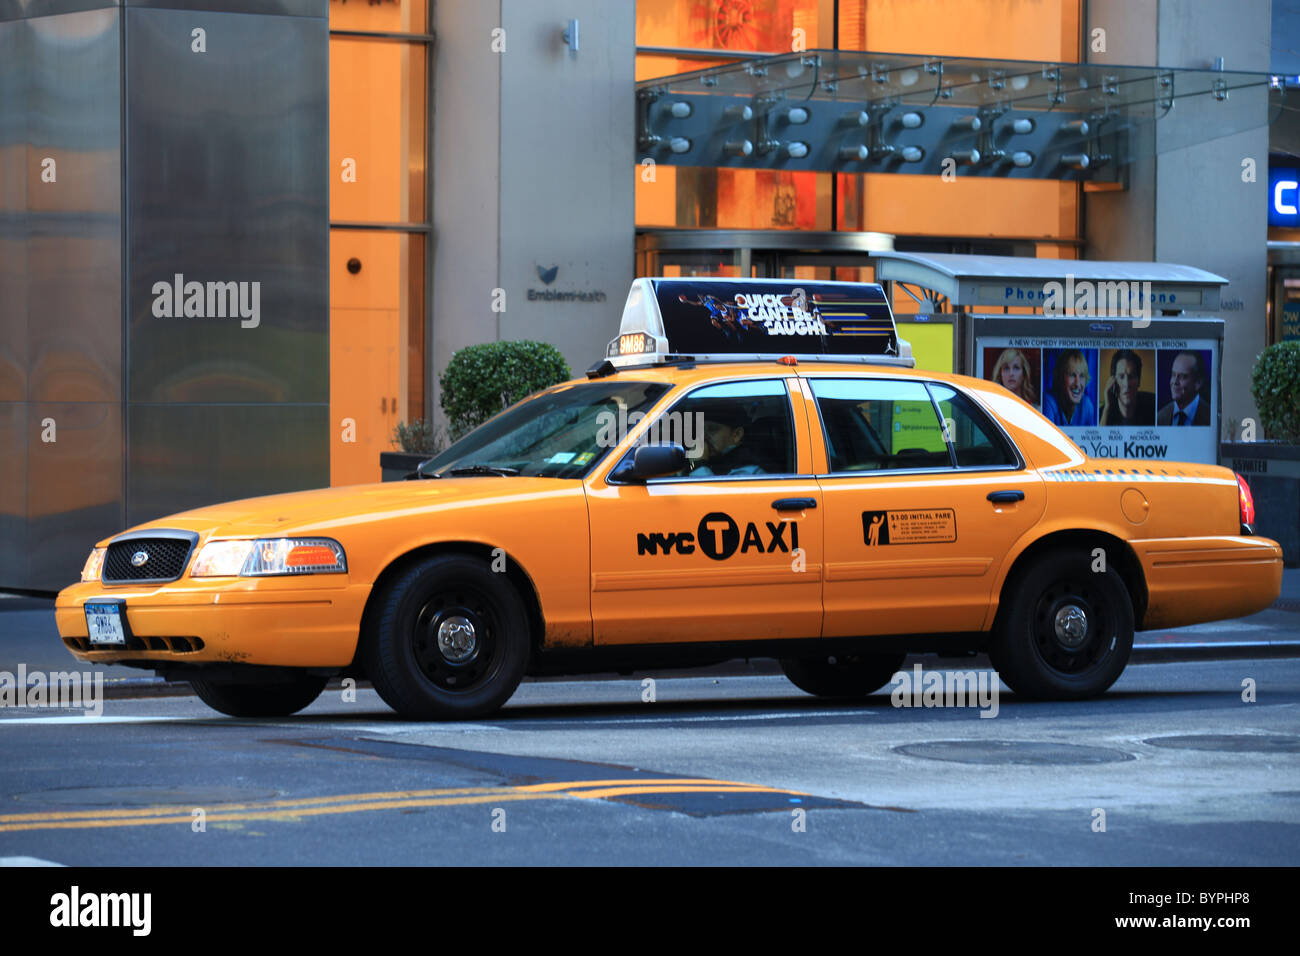 New York yellow taxi in motion on street Stock Photo